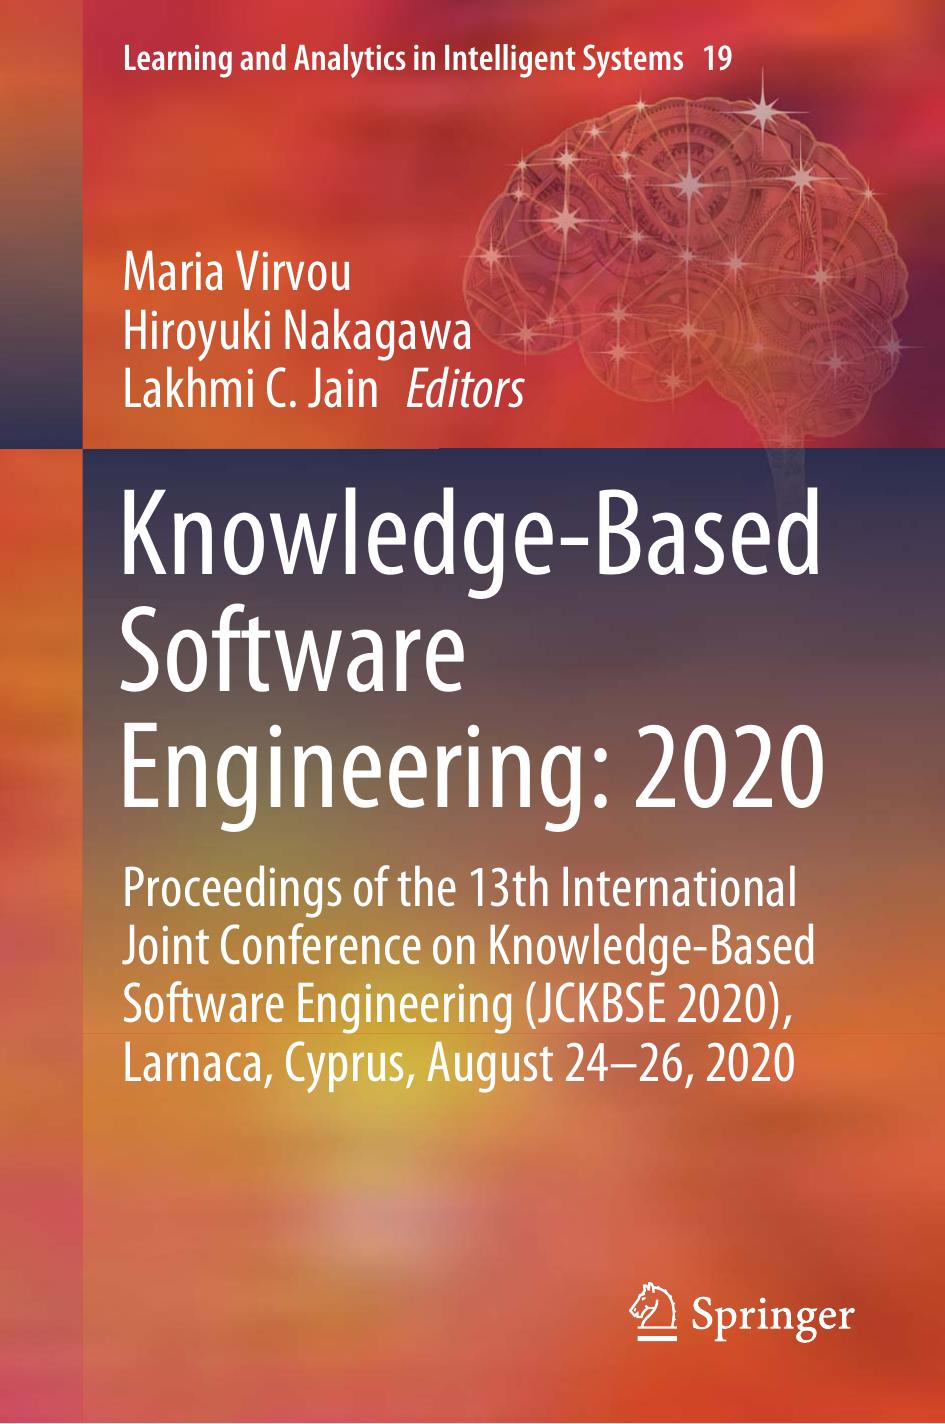 Knowledge-Based Software Engineering: 2020: Proceedings of the 13th International Joint Conference on Knowledge-Based Software Engineering (JCKBSE 2020), Larnaca, Cyprus, August 24-26, 2020